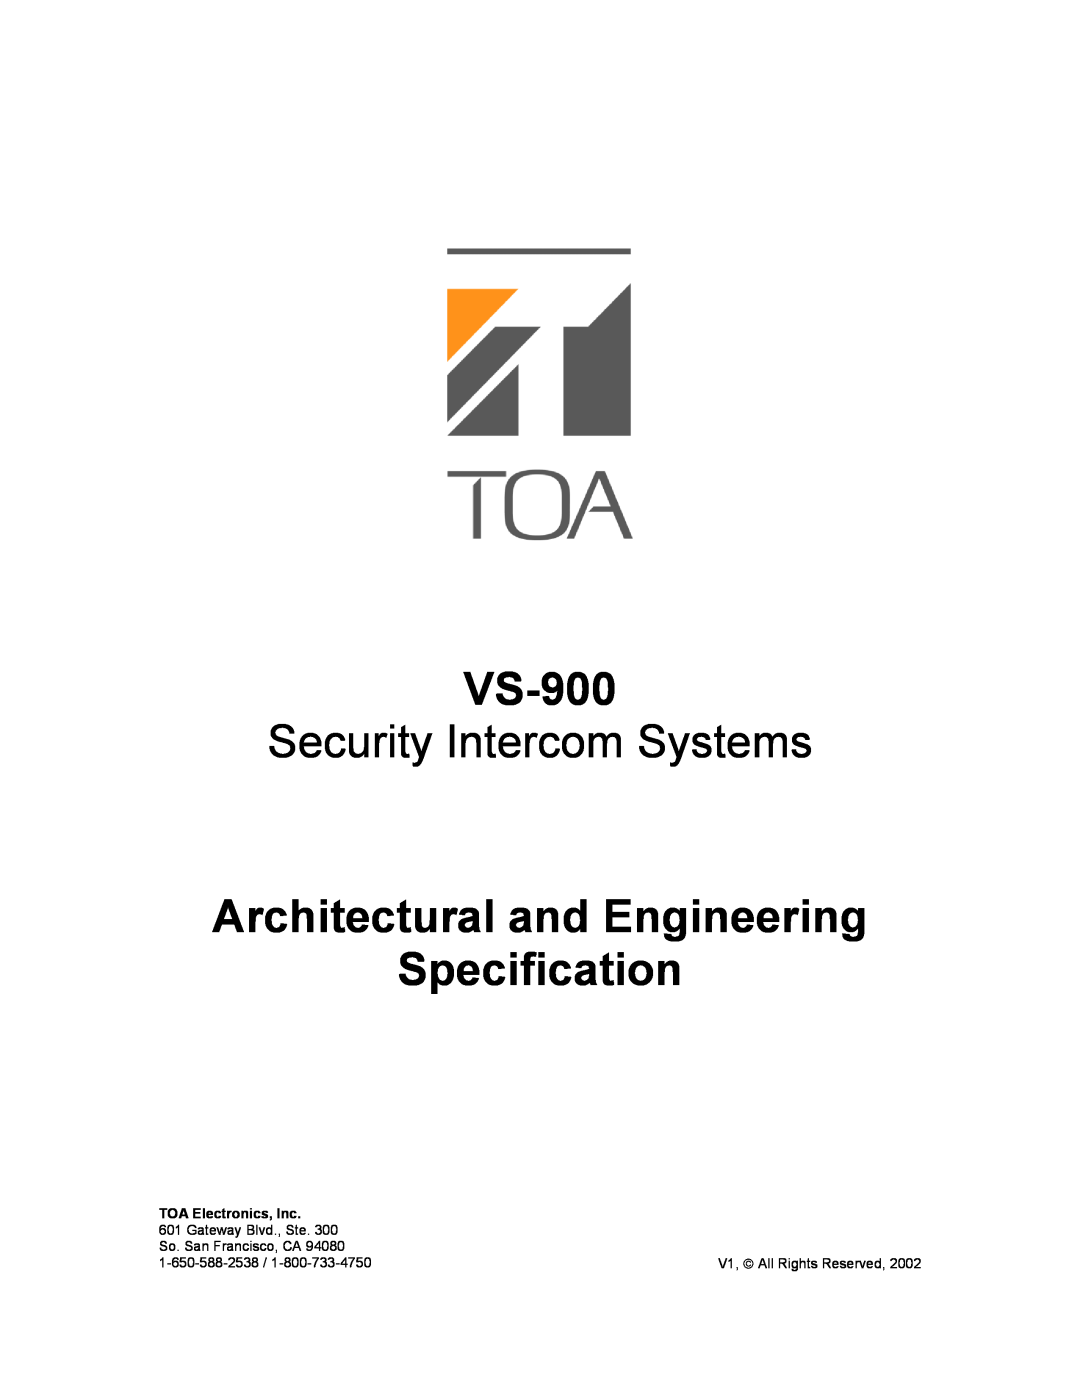 TOA Electronics VS-900 manual Security Intercom Systems, Architectural and Engineering Specification, TOA Electronics, Inc 